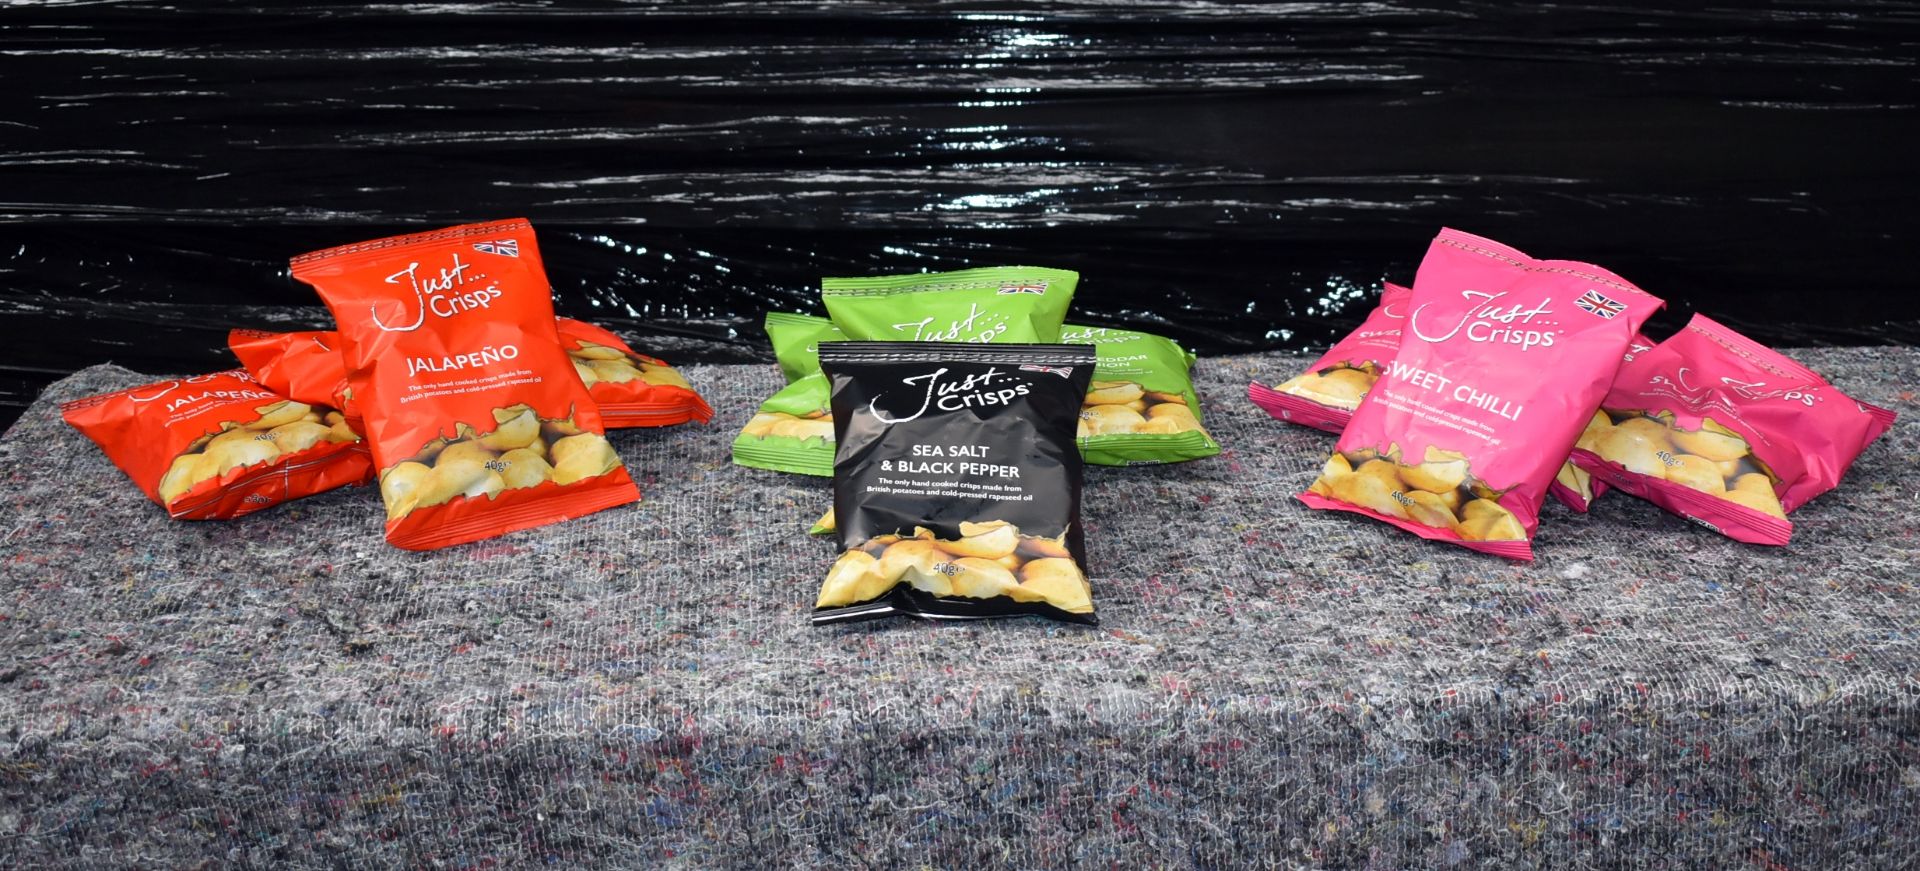 36 x Assorted Consumable Food Products Including Bags of JUST Flavoured Crisps- Ref: TCH405 -